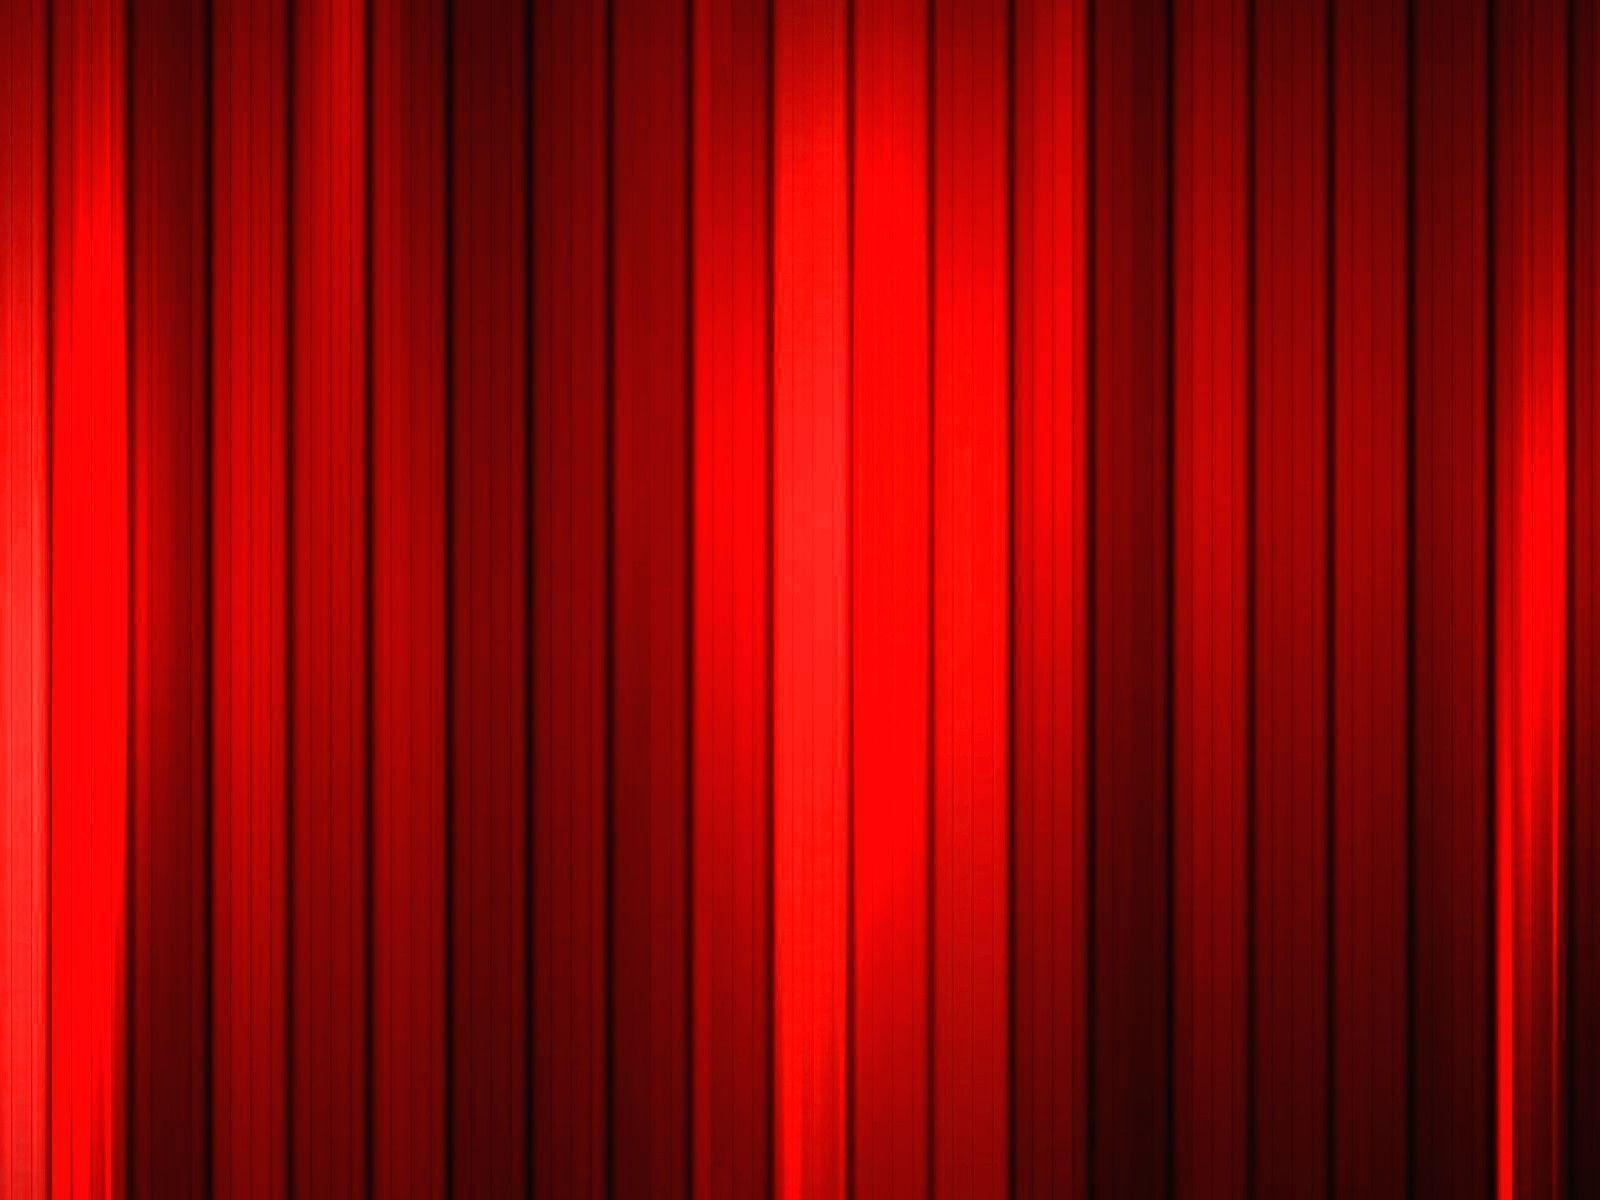 The Image of Bars Red 1600x1200 HD Wallpaper at